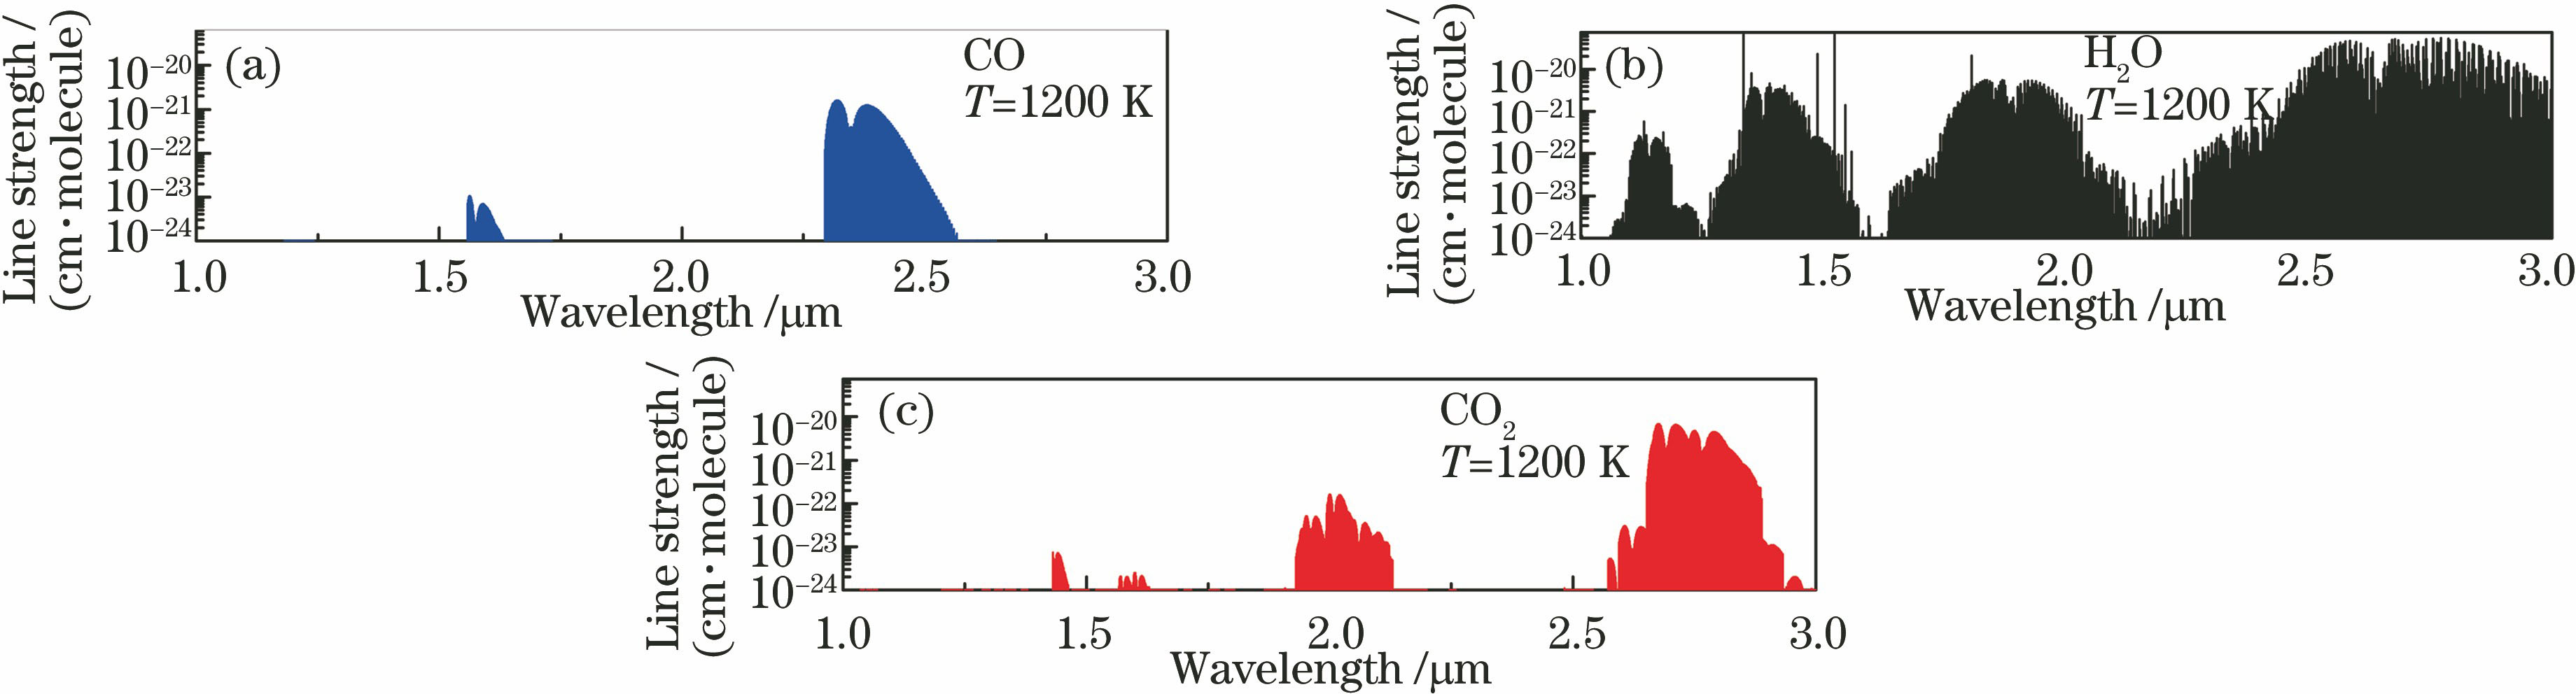 Absorption line strength of (a) CO, (b) H2O and (c) CO2 in the wavelength range of 1-3 μm